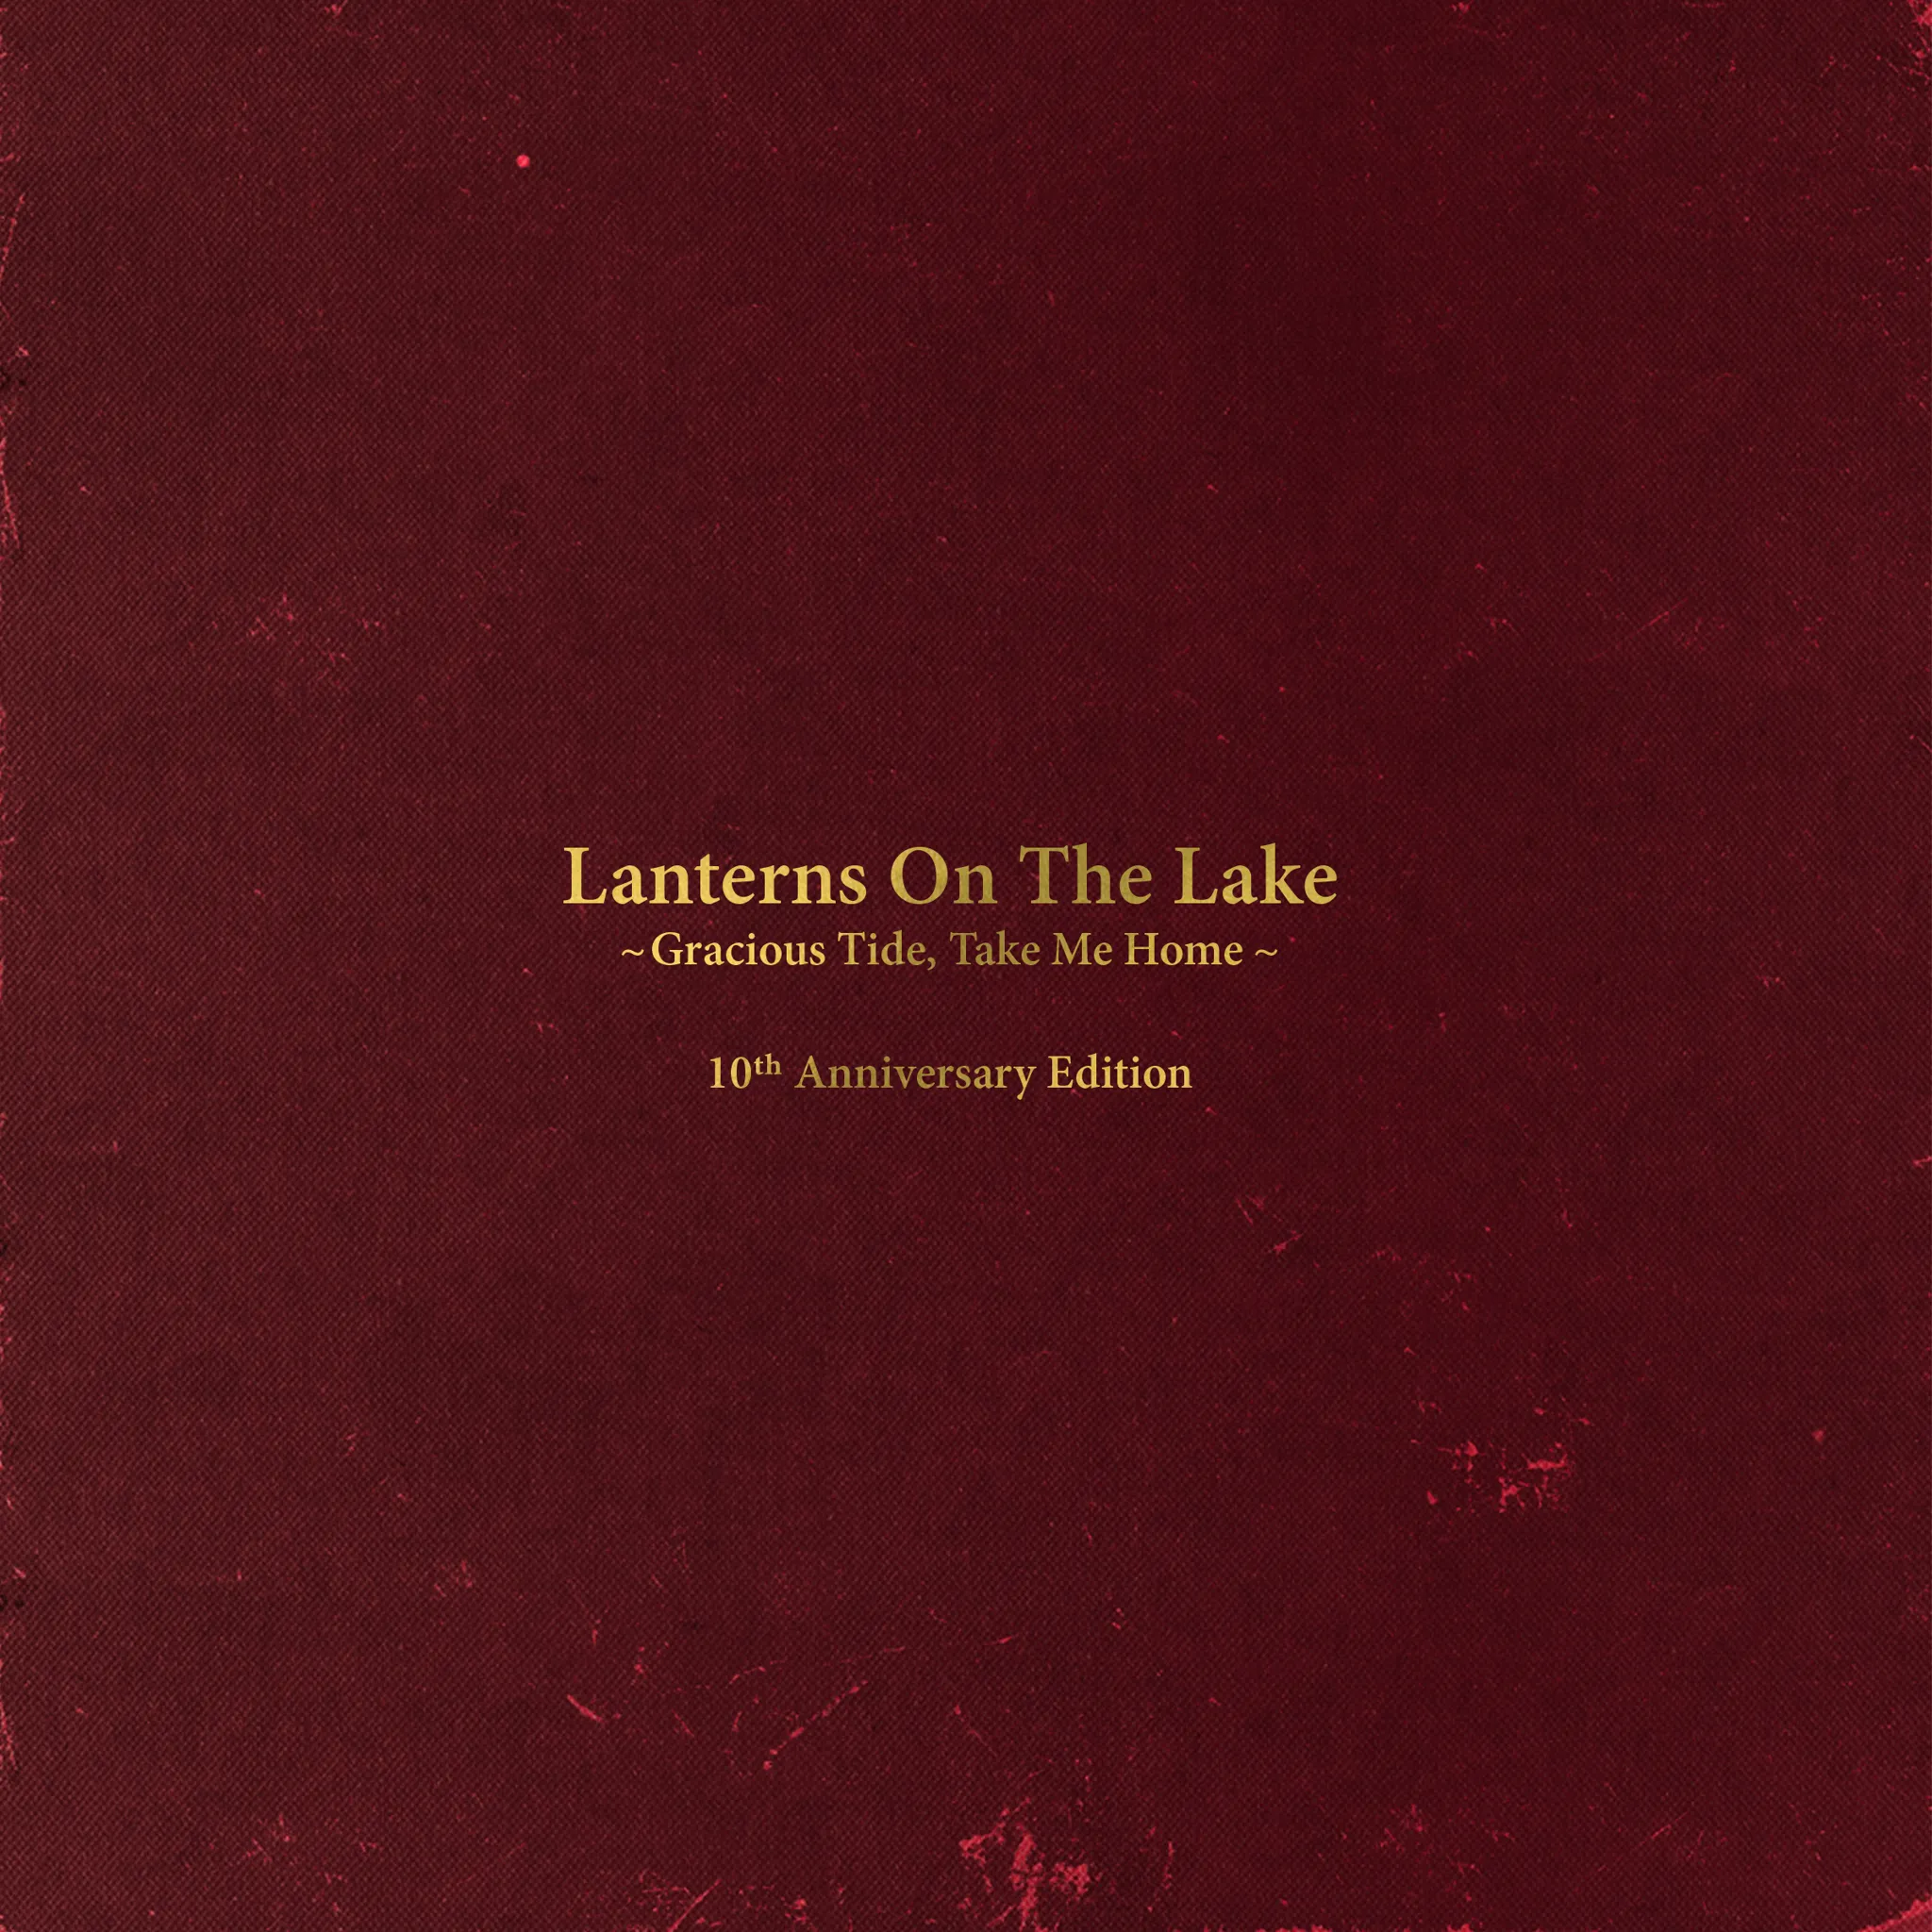 <strong>Lanterns On The Lake - Gracious Tide, Take Me Home – 10th Anniversary Edition</strong> (Vinyl LP - black)